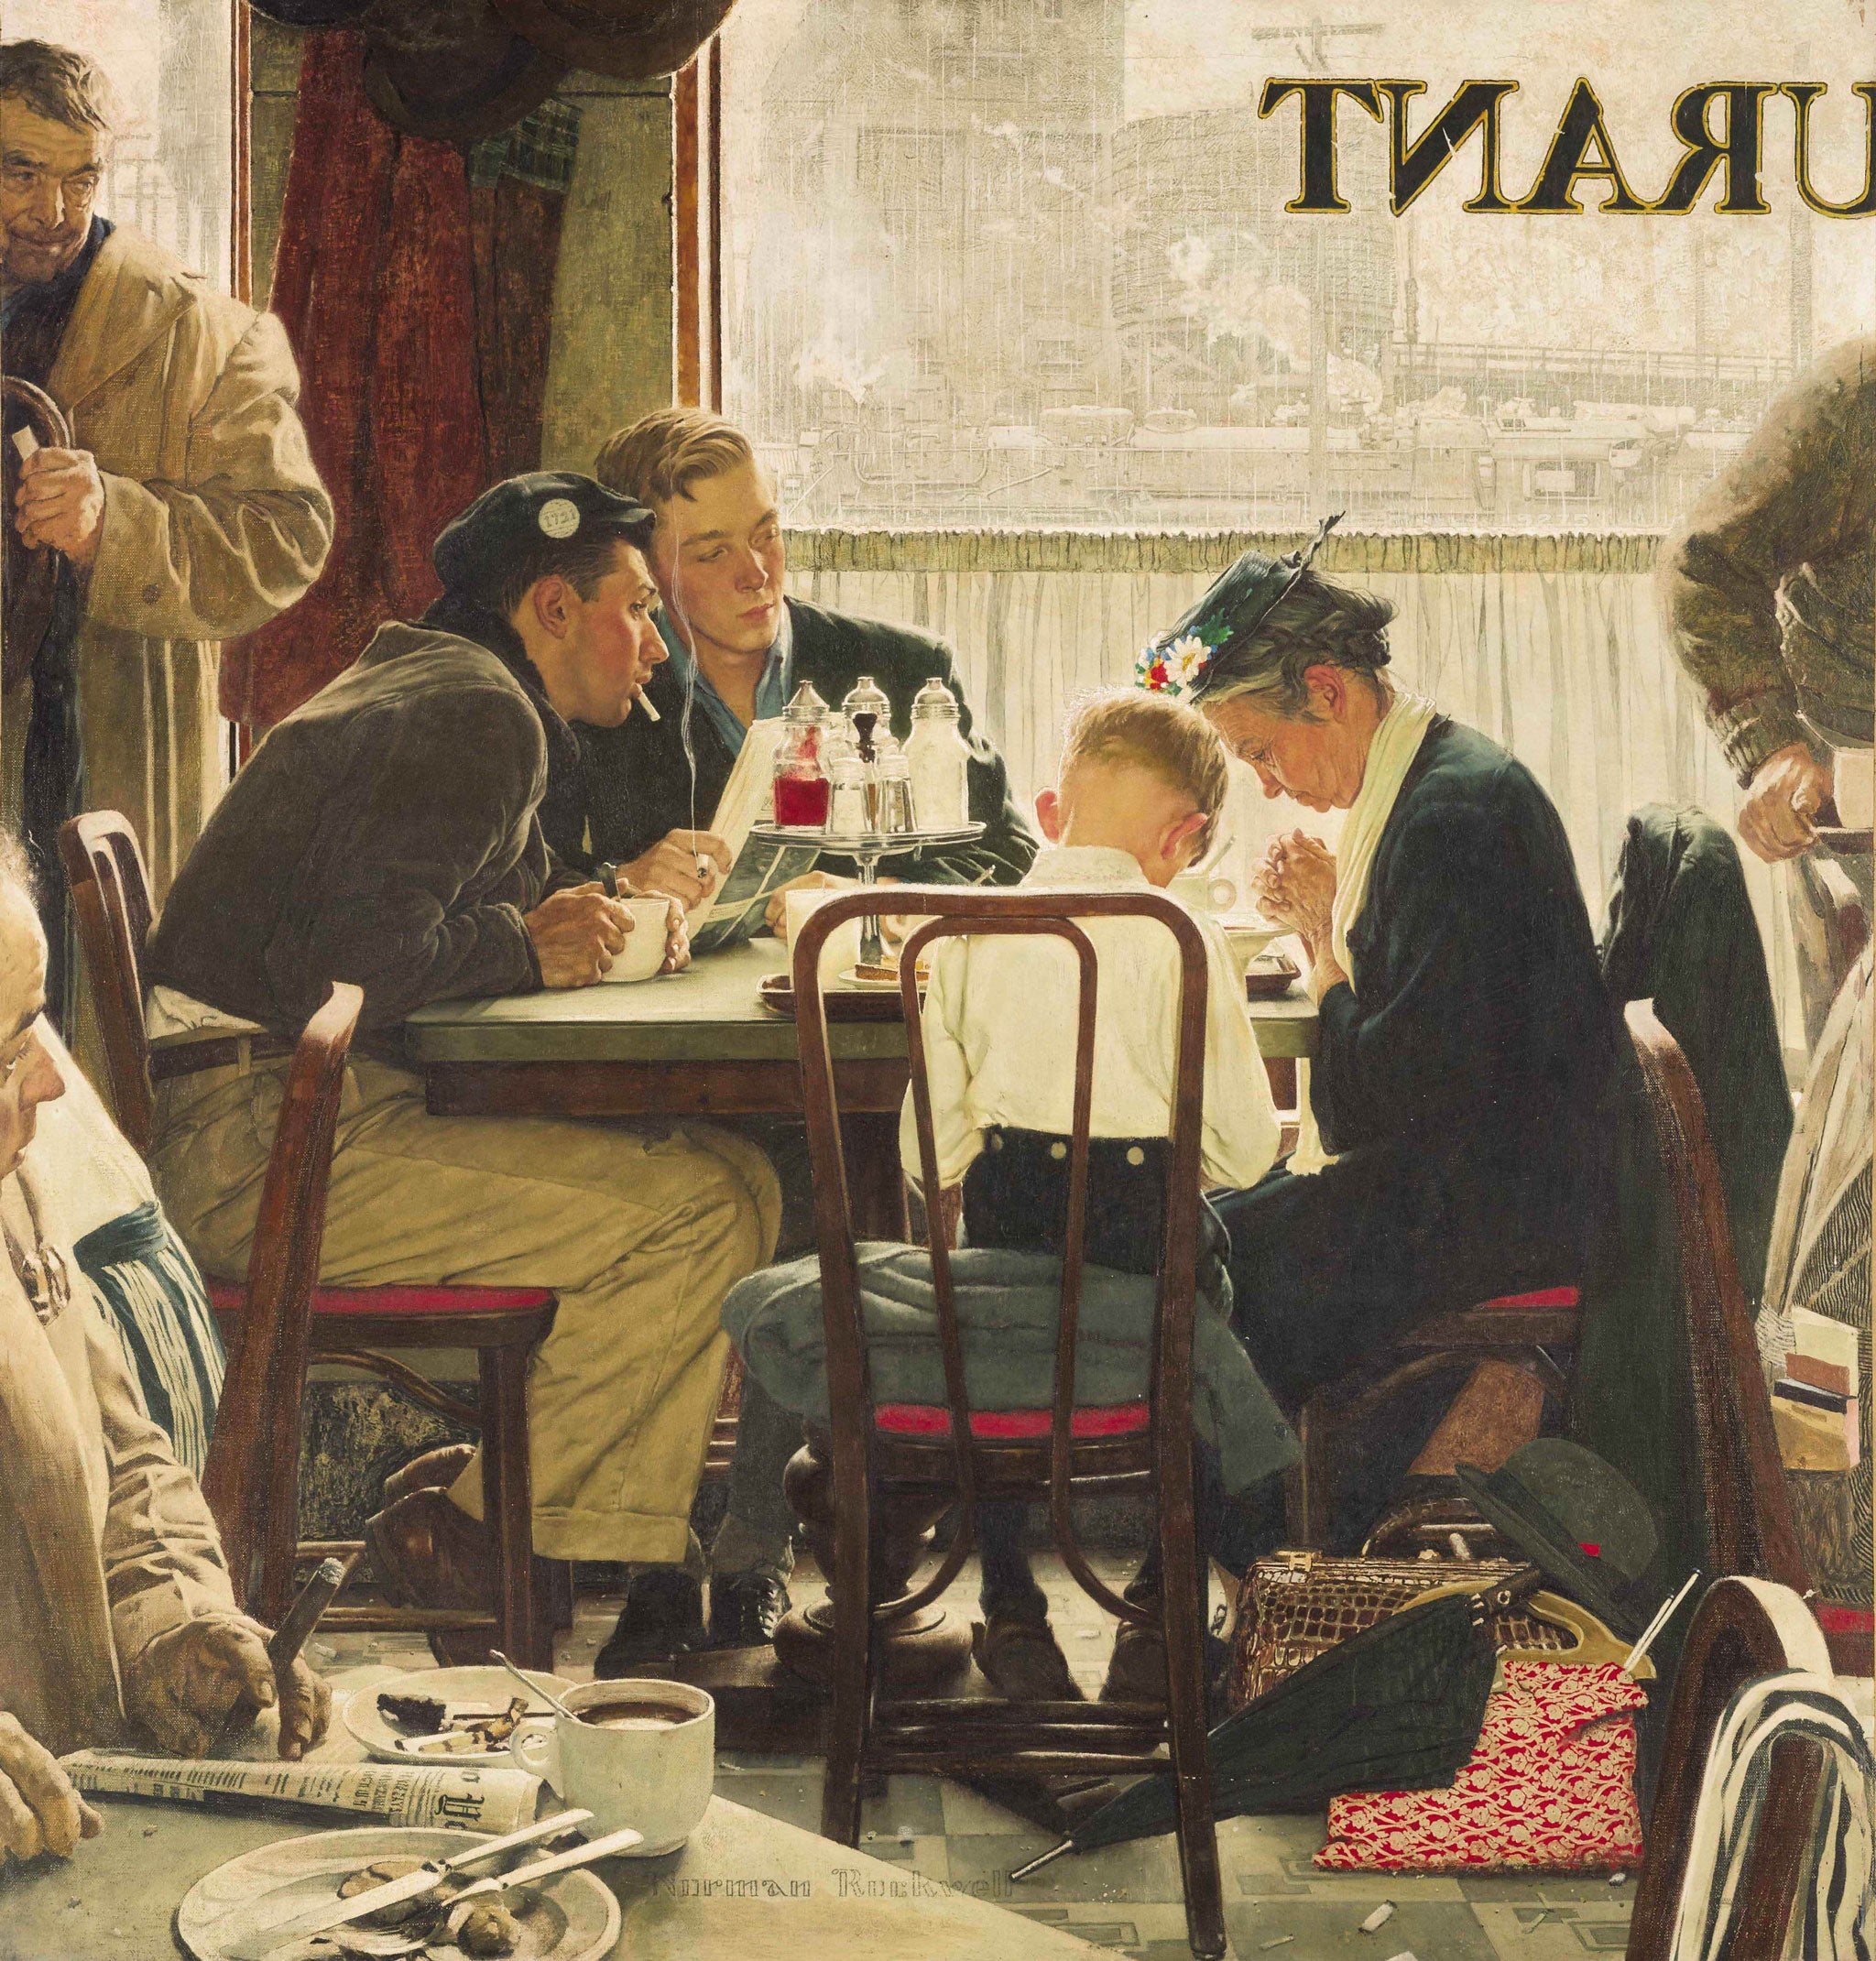 Norman Rockwell’s masterpiece ‘Saying Grace’ sold for $46m in New York last week – a record price for a work by an American